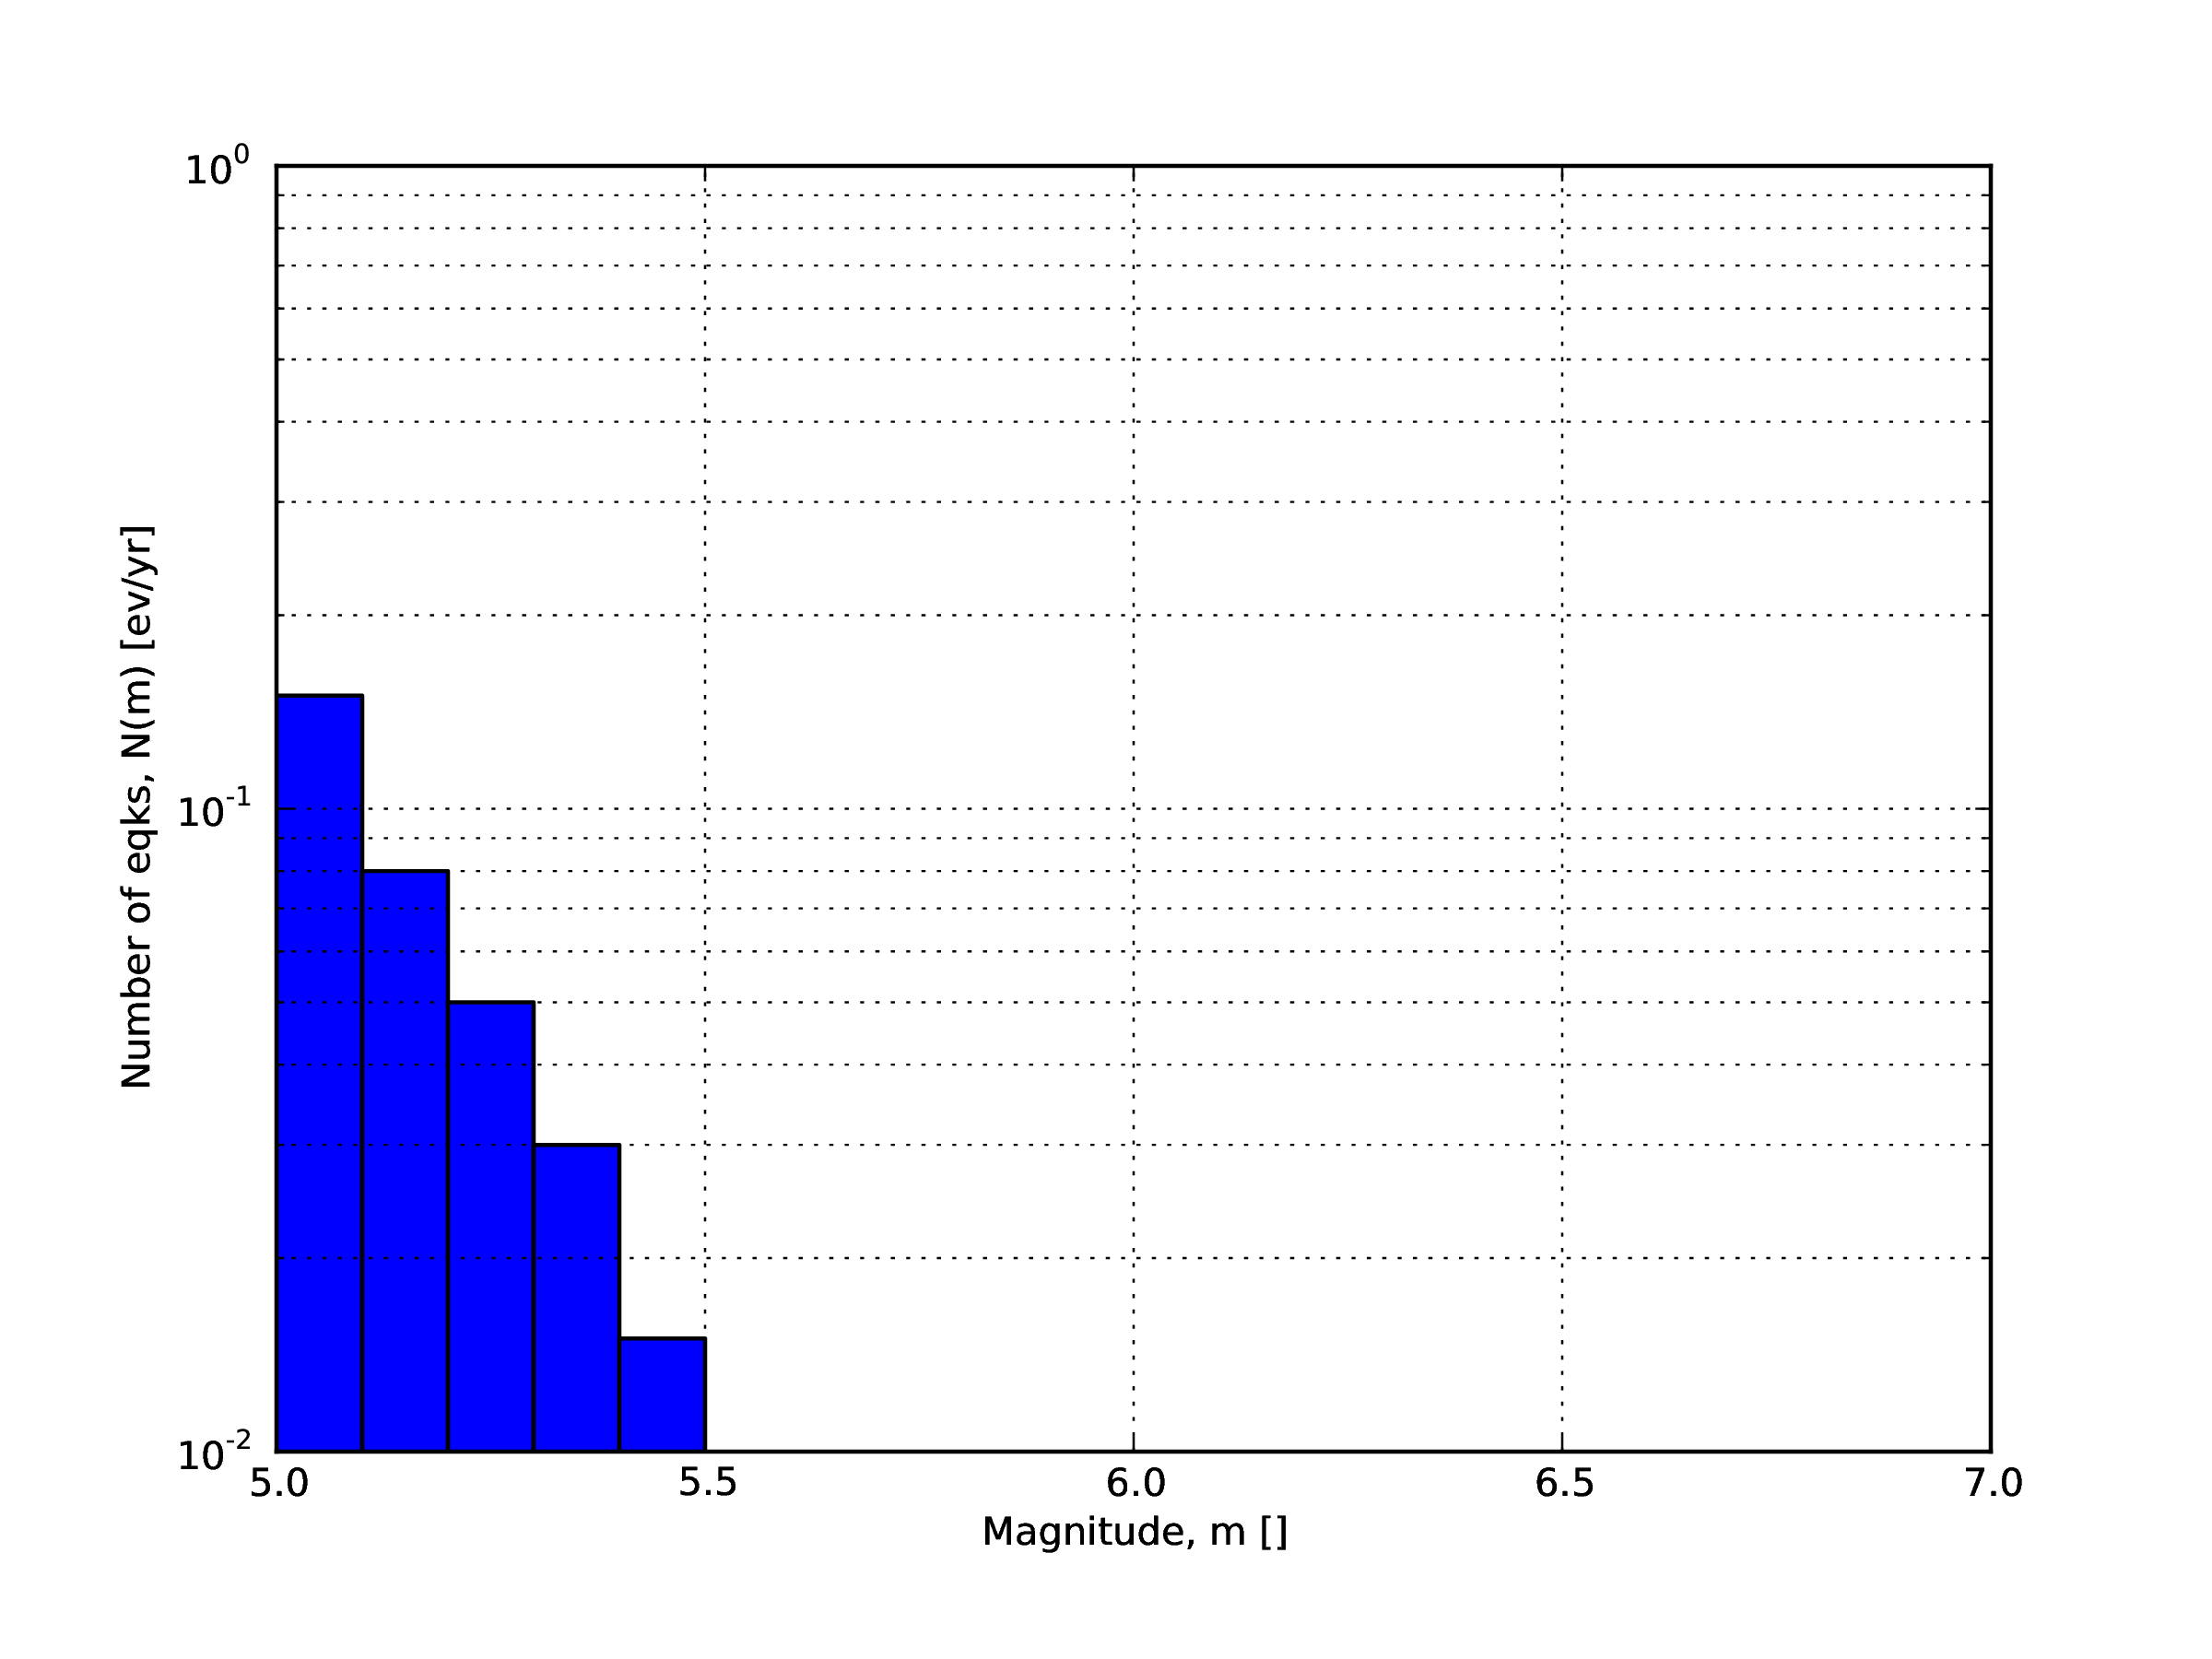 Example of an incremental magnitude-frequency distribution.